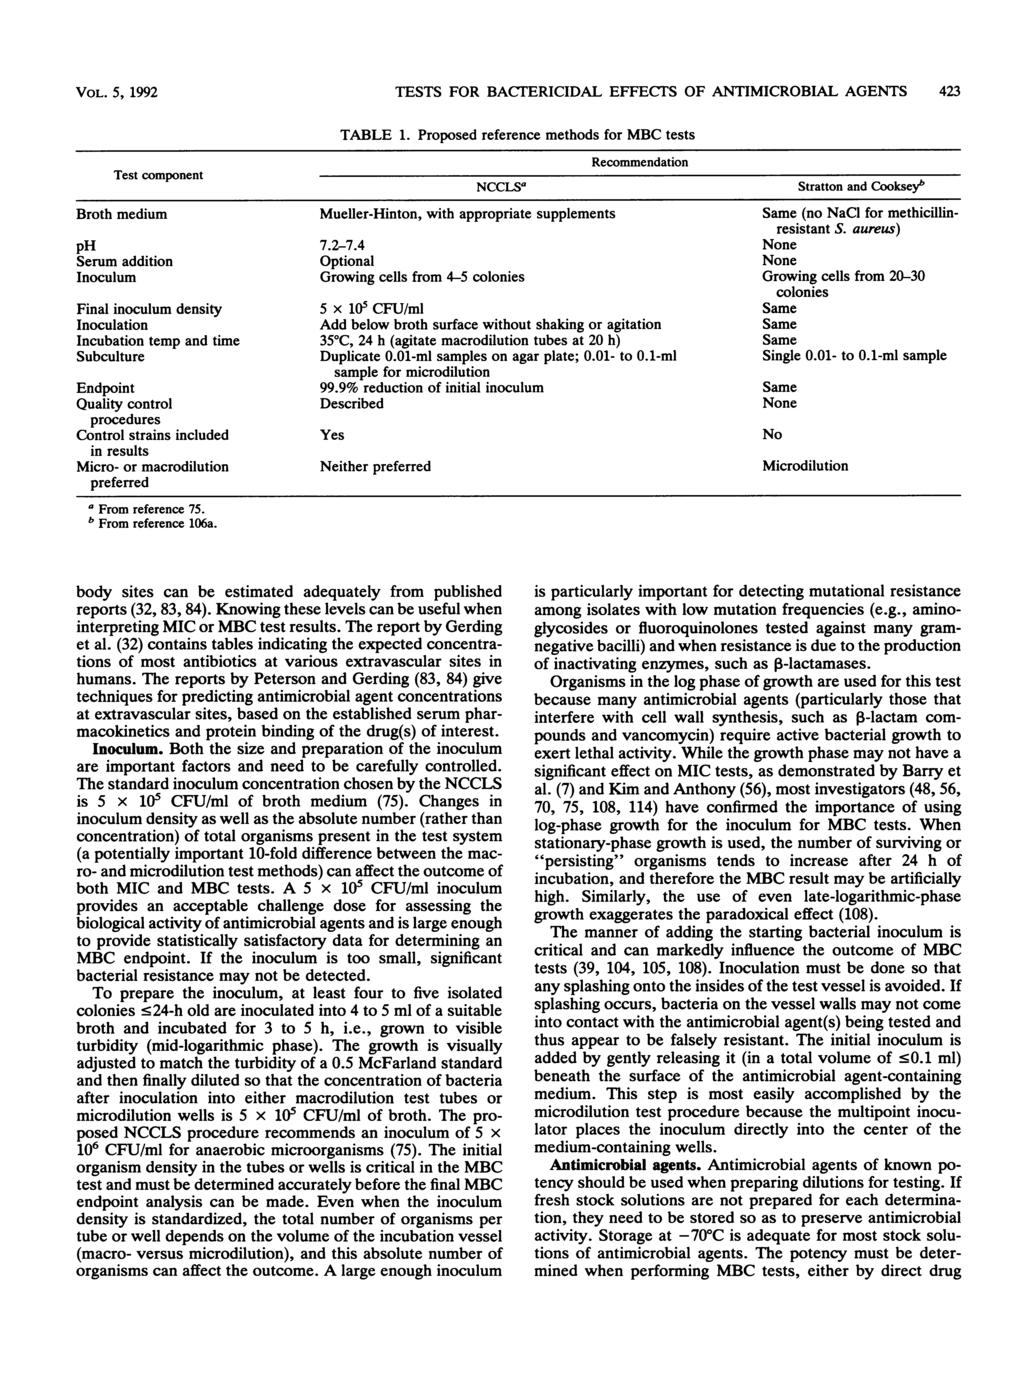 VOL. 5, 1992 TESTS FOR BACTERICIDAL EFFECTS OF ANTIMICROBIAL AGENTS 423 TABLE 1.